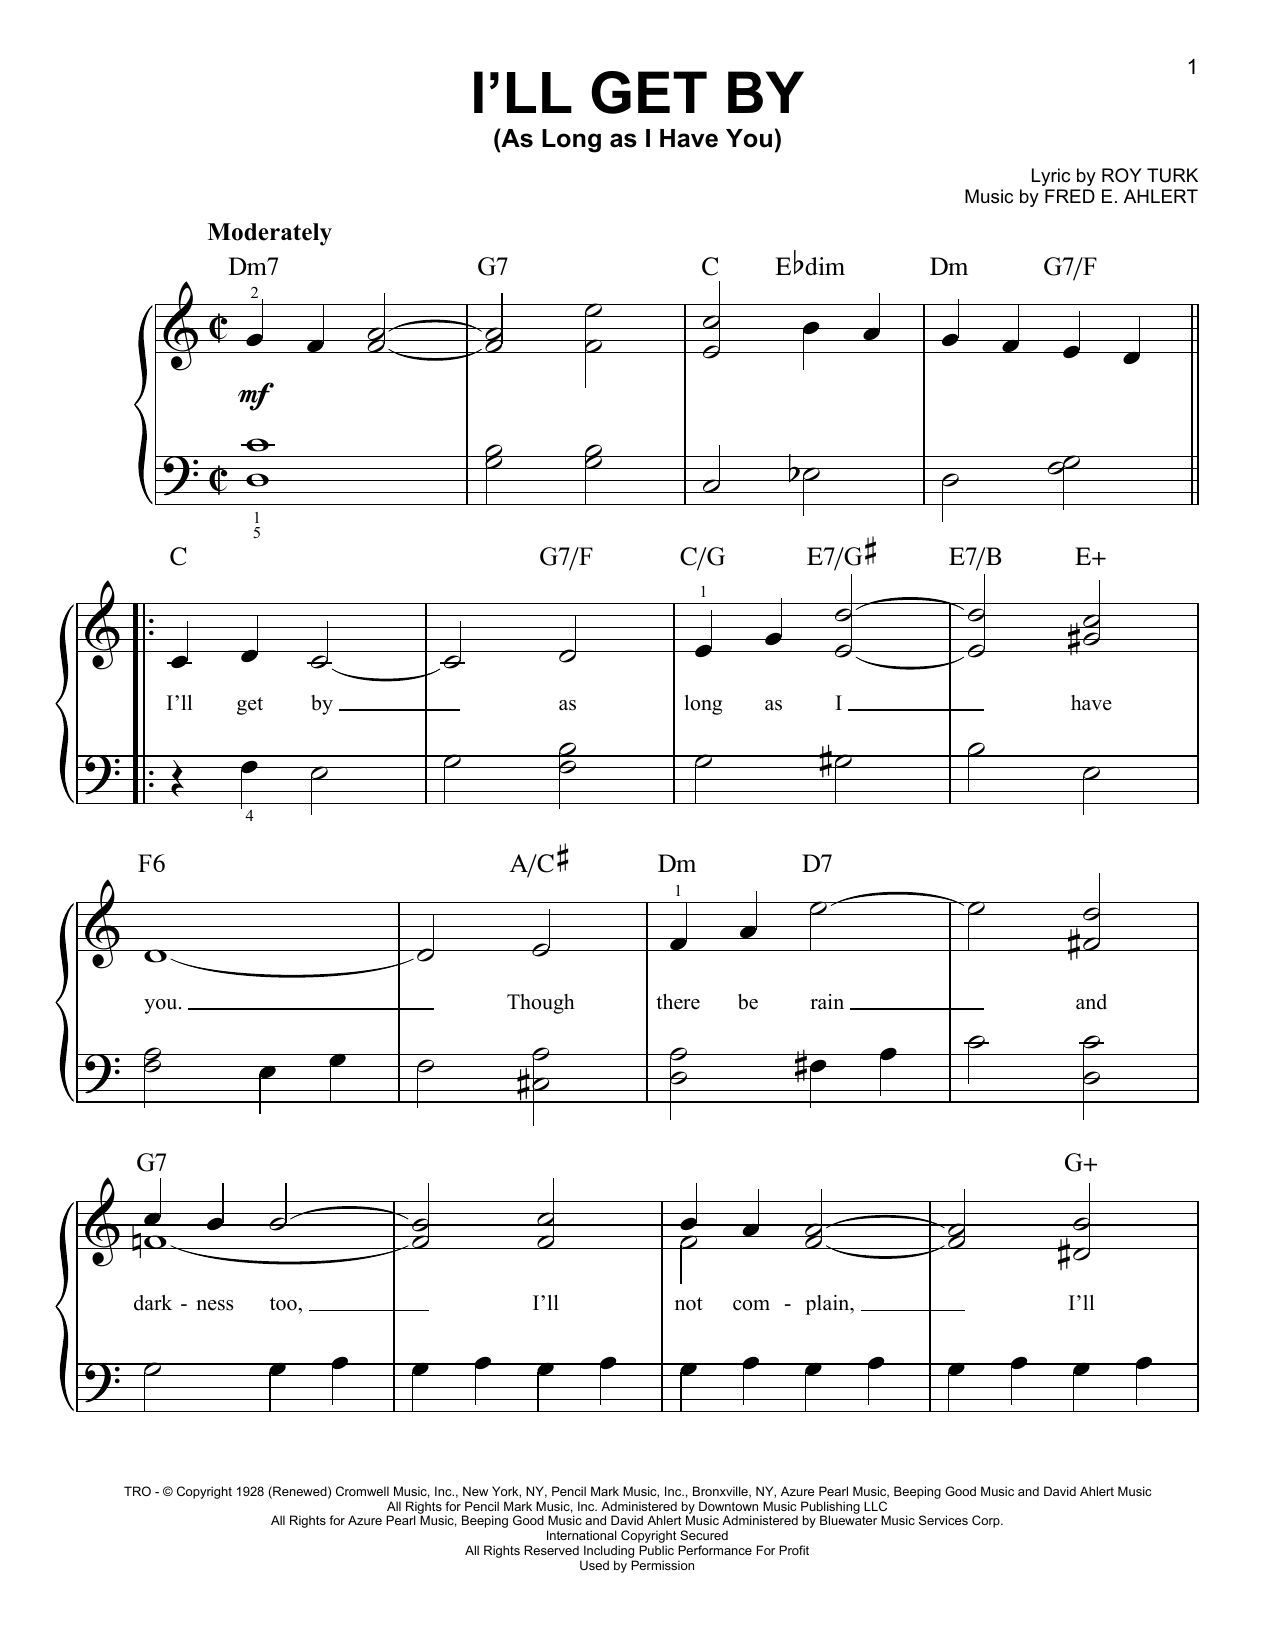 Download Fred E. Ahlert I'll Get By (As Long As I Have You) Sheet Music